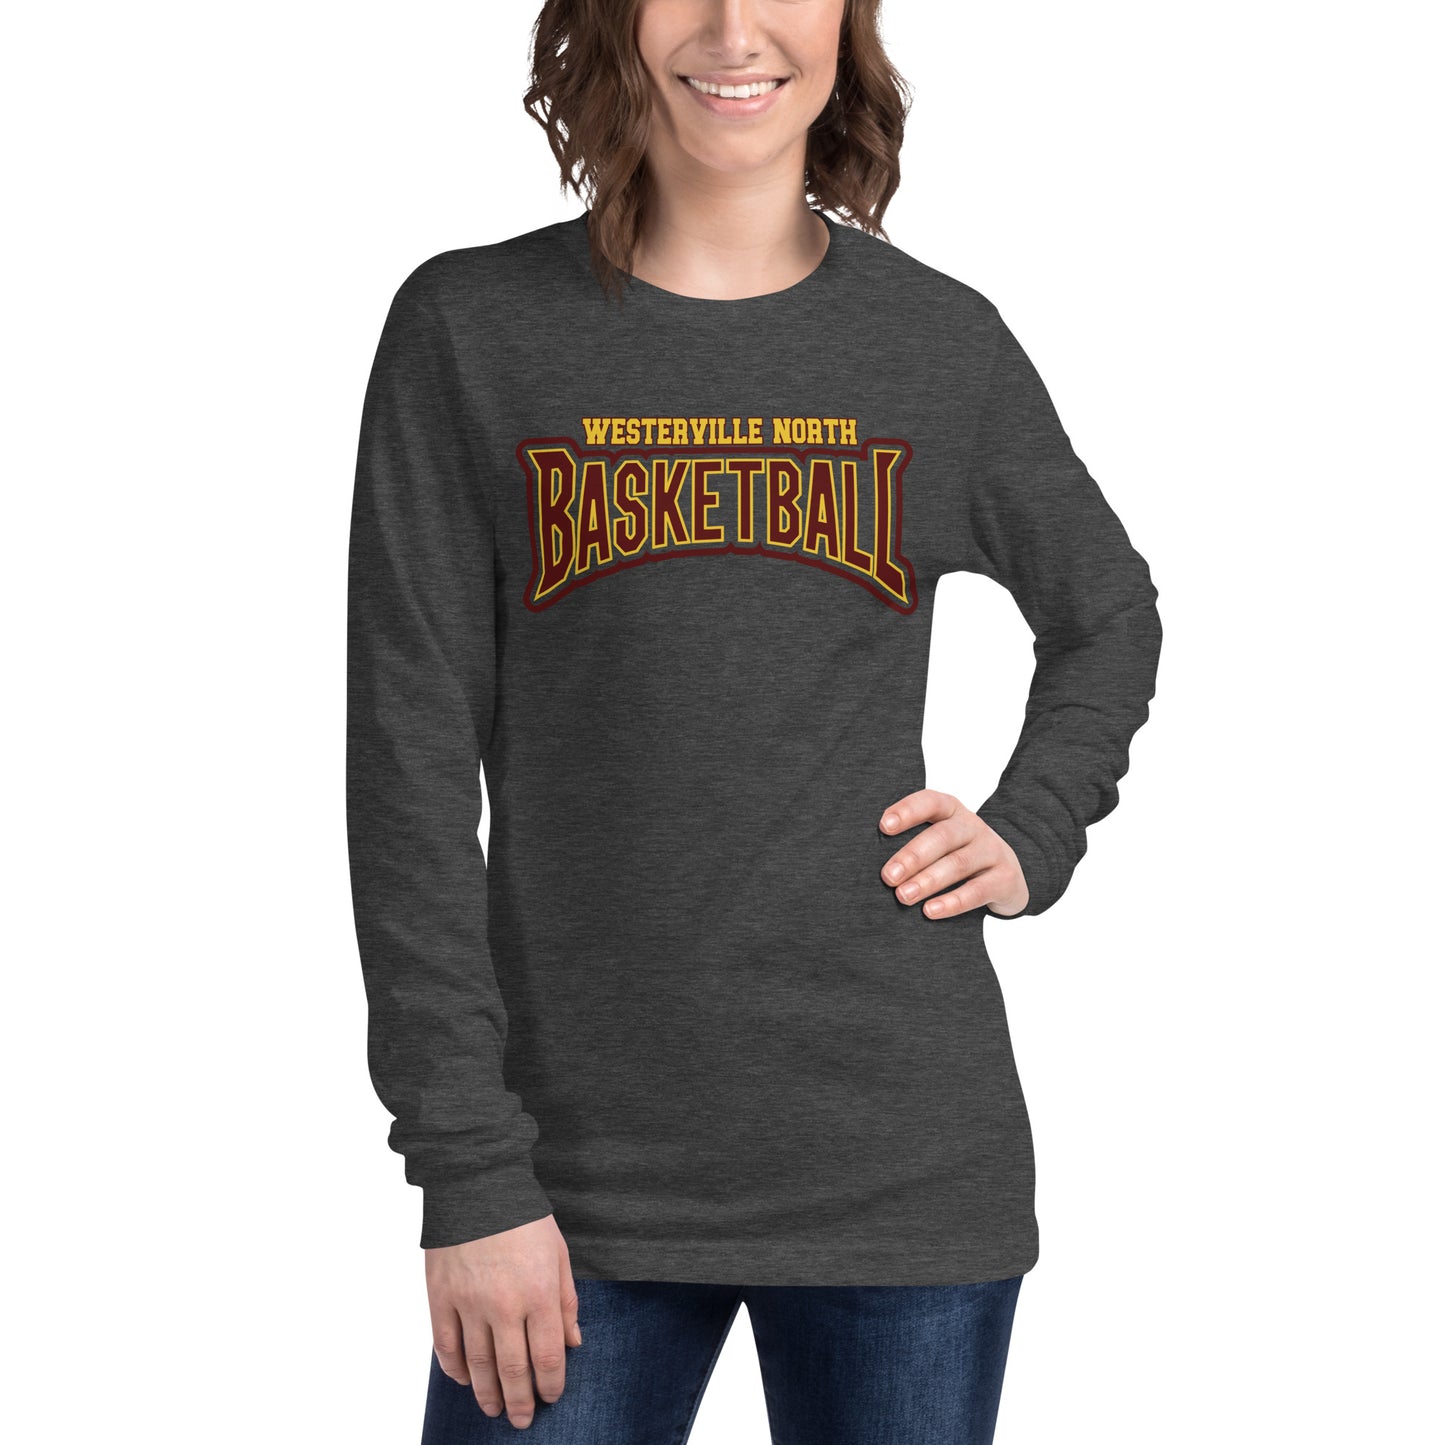 Westerville North BB Long Sleeve Tee